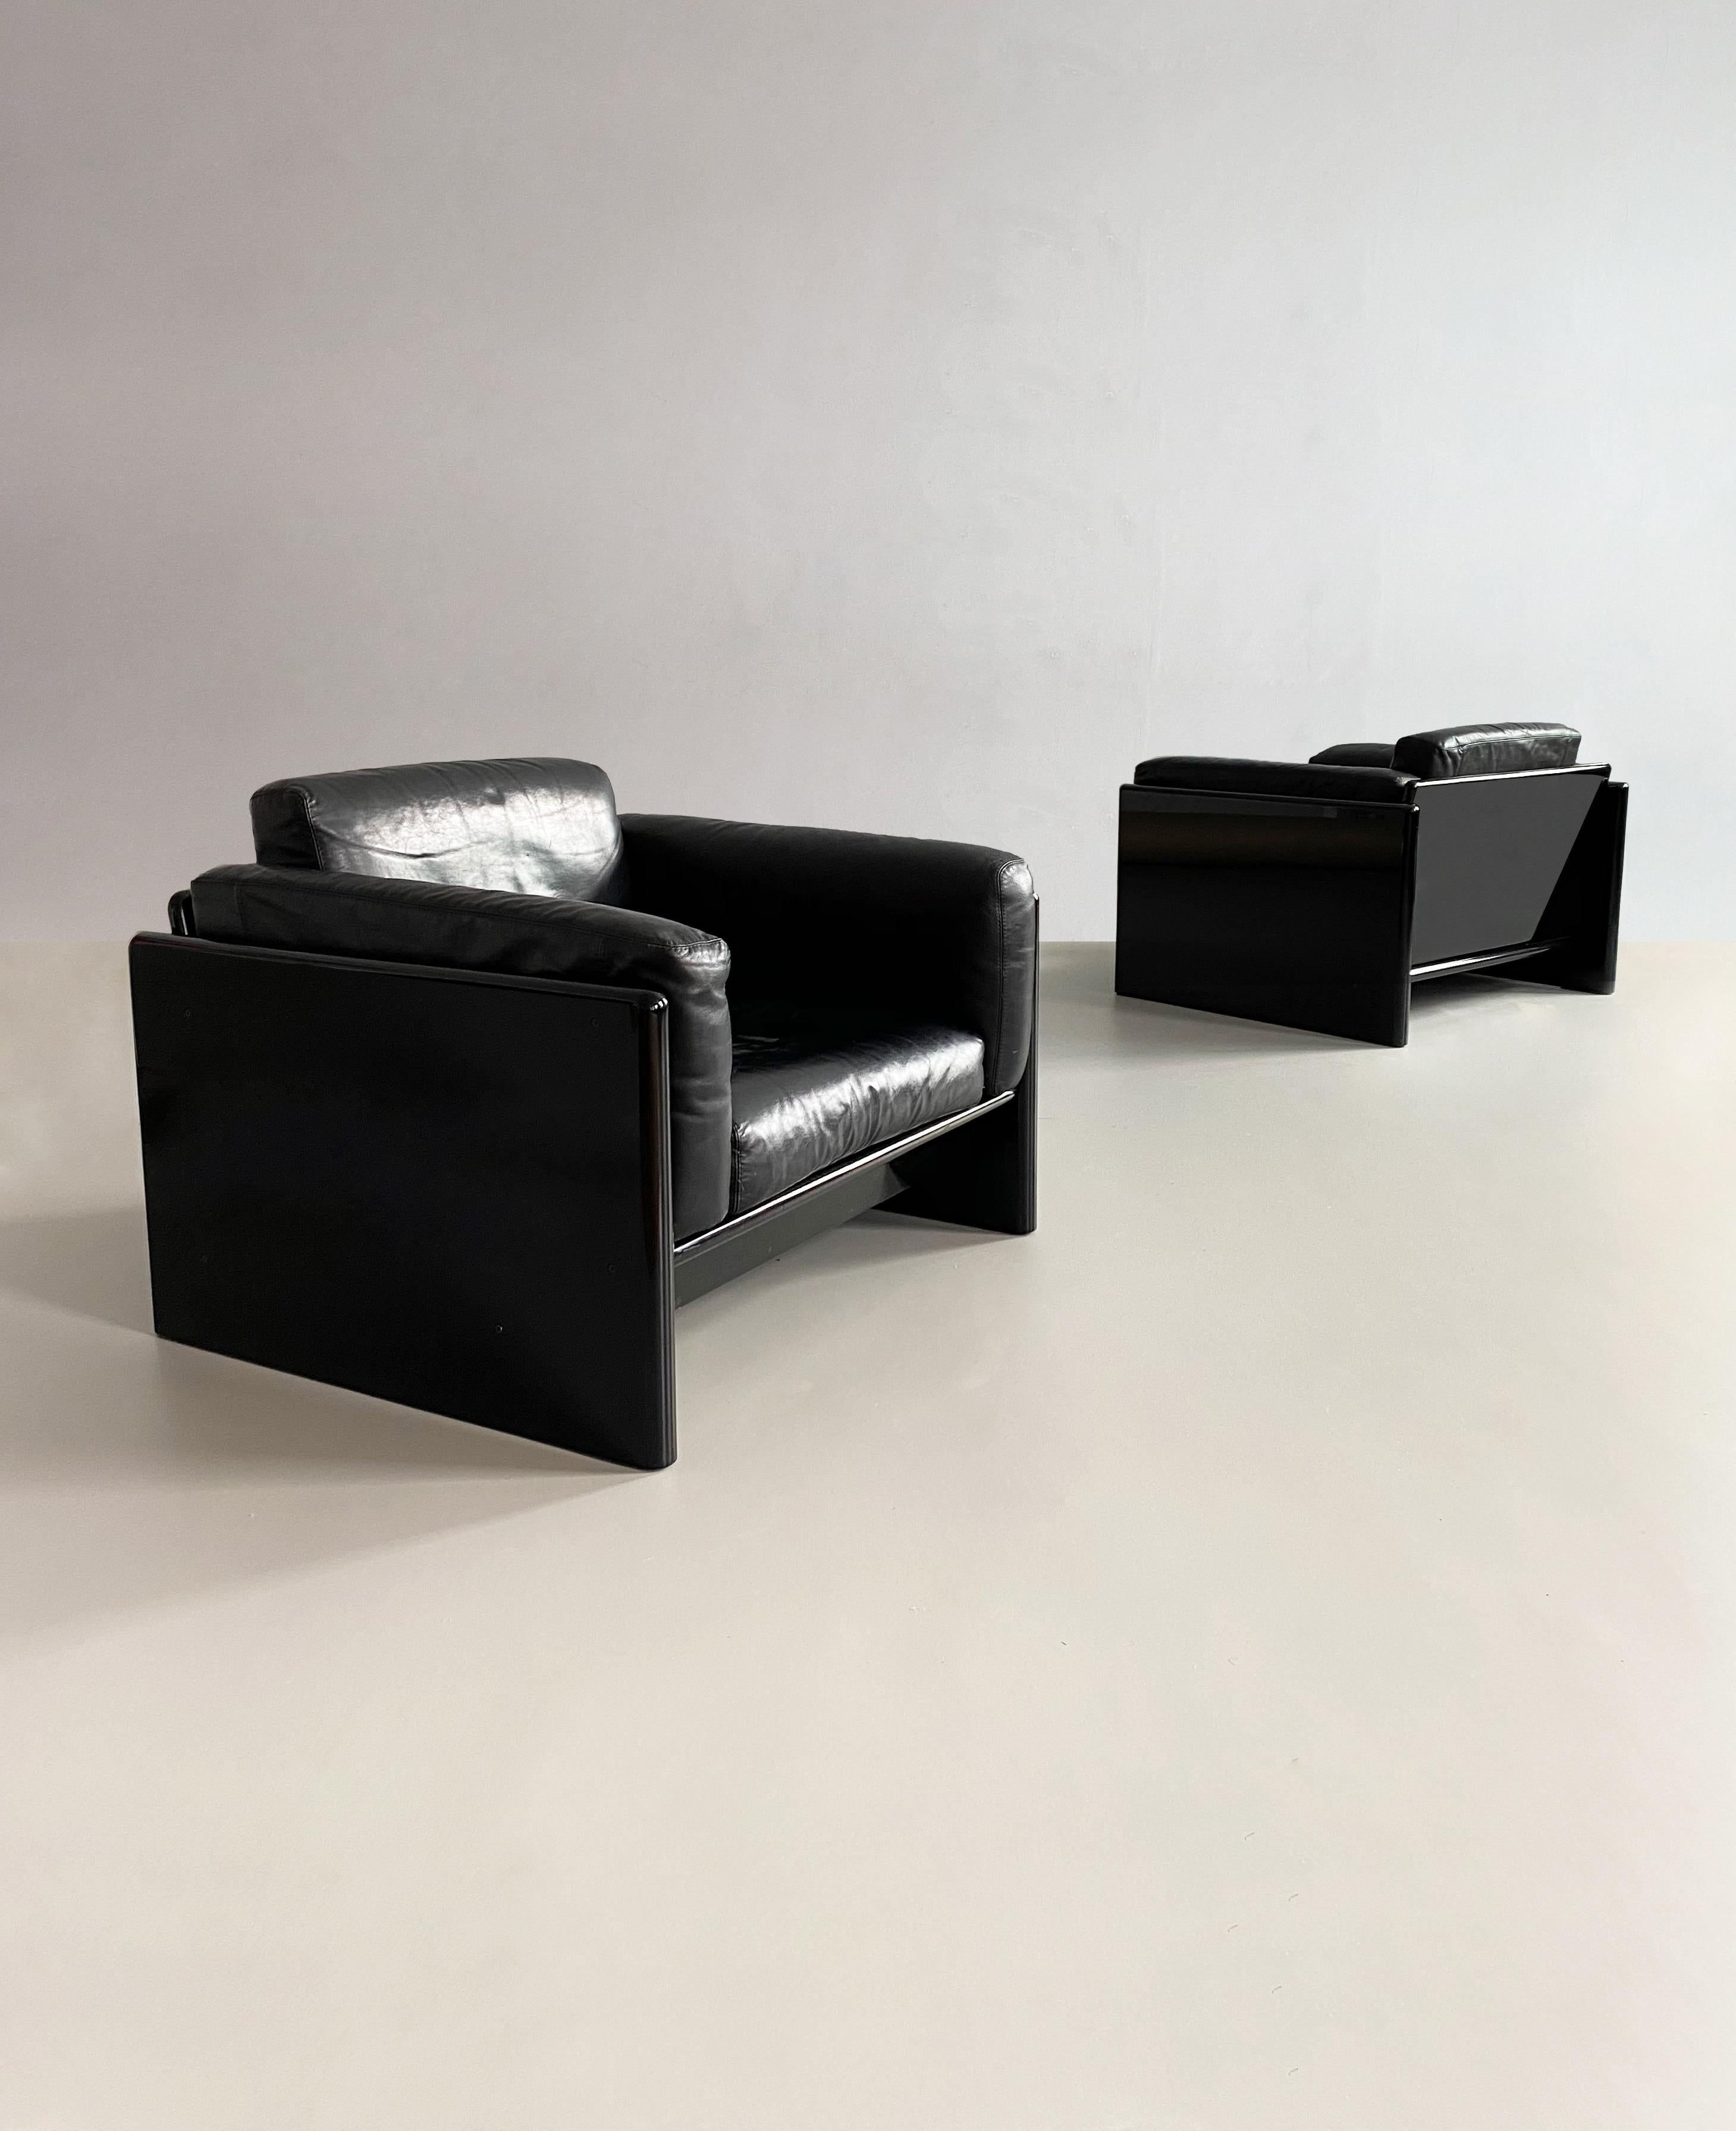 Pair of rare, exquisite, piano black 'Simone' armchairs designed by prolific Italian design influencer Dino Gavina (founder of Flos and Gavina) for Studio Simon in the 1970s.

Dimensions (cm, approx): 
Height: 70 
Width: 94 
Depth: 81 
Height